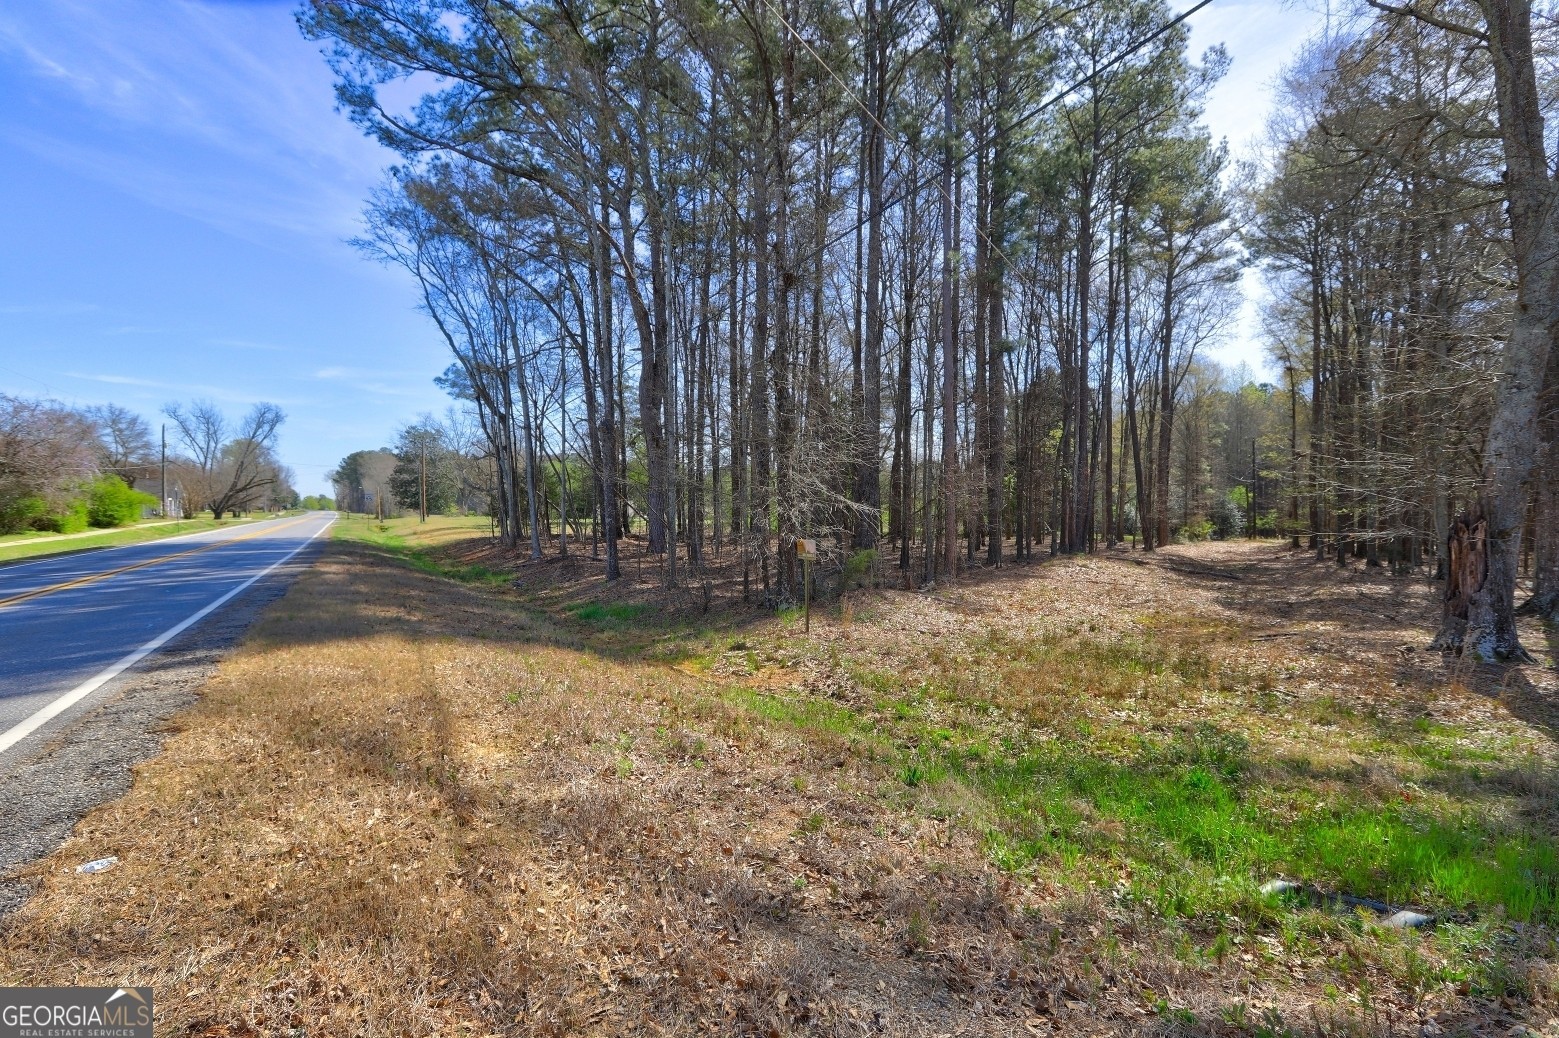 2. 205 Highway 186 Tract 1